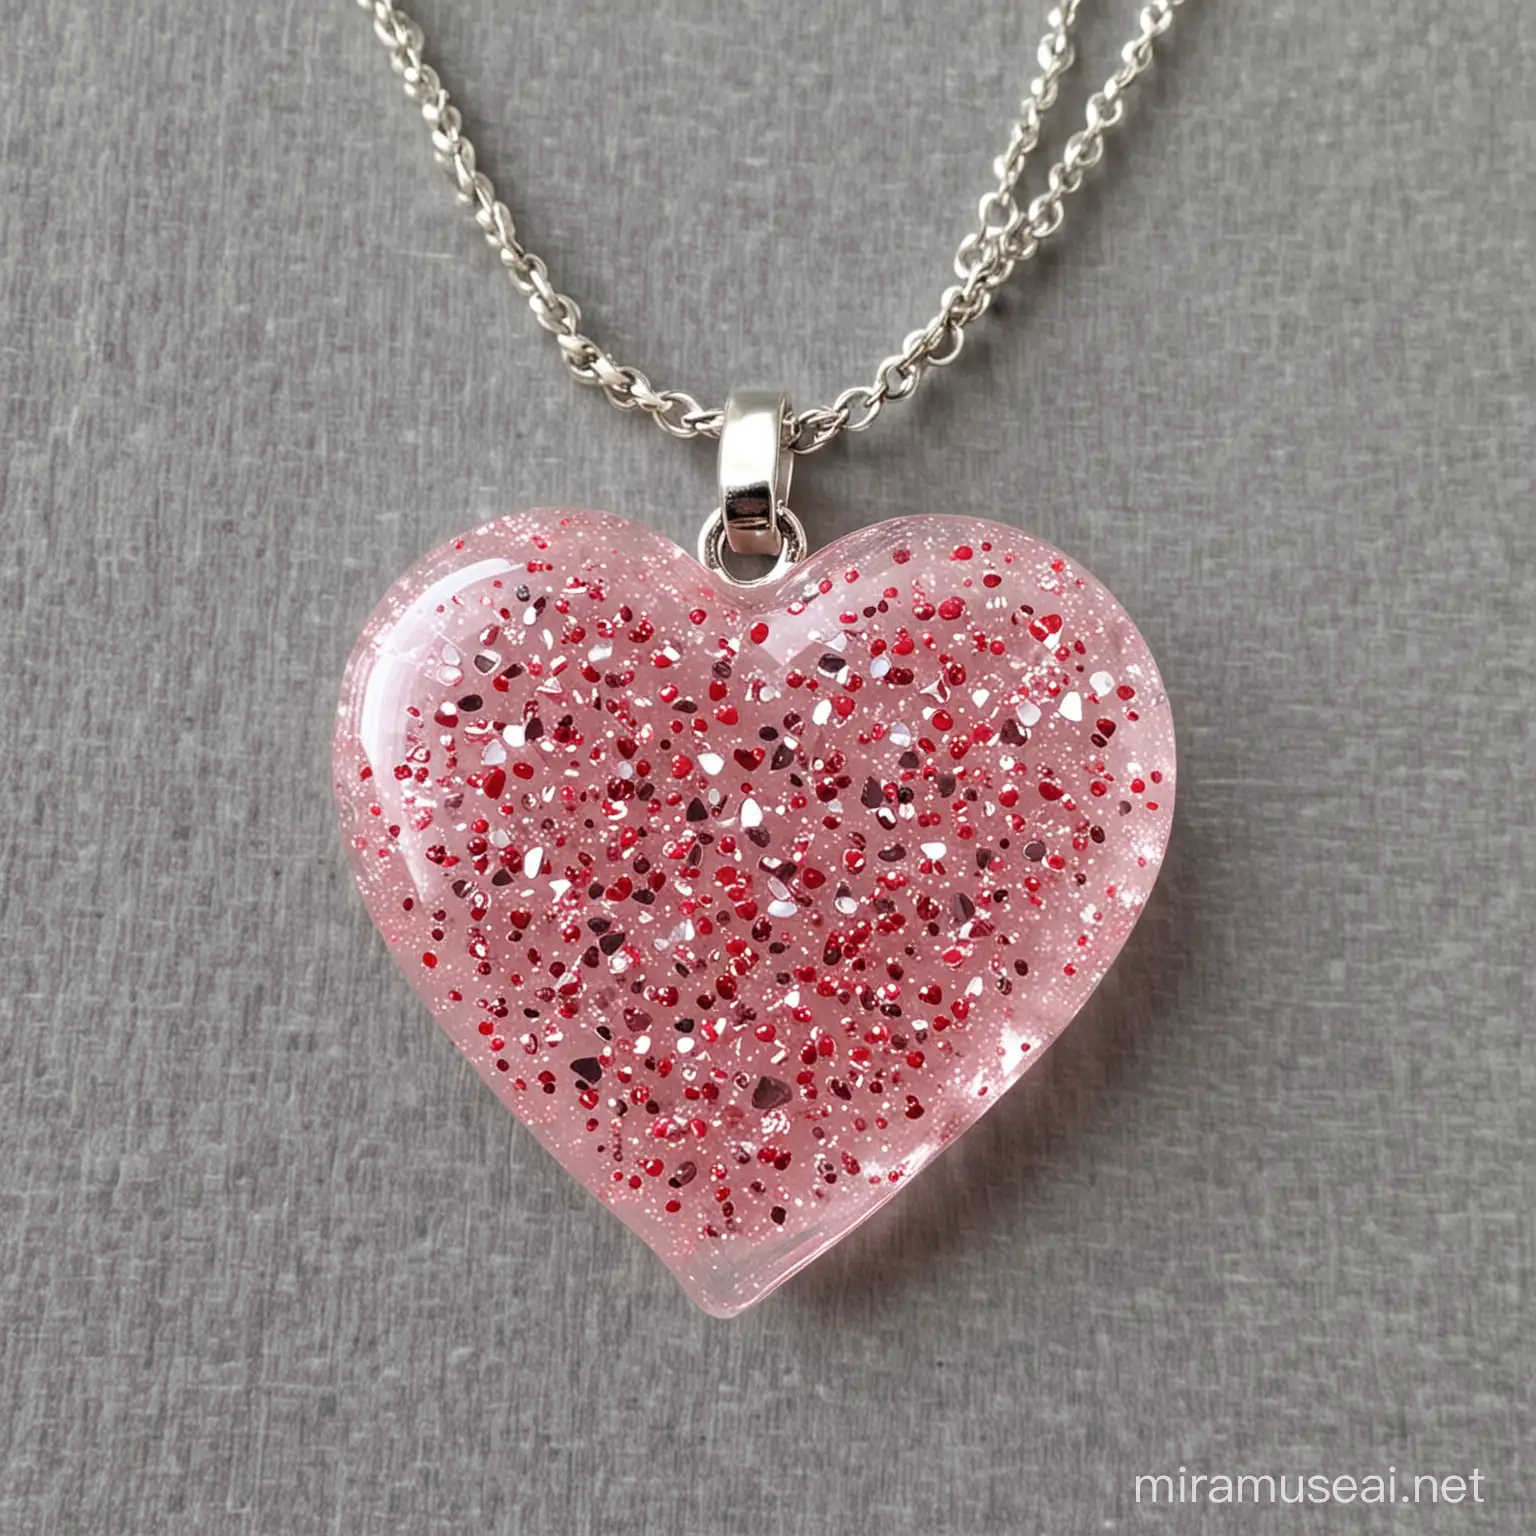 Handcrafted Resin Heart Pendant with Metallic Flakes and Beads